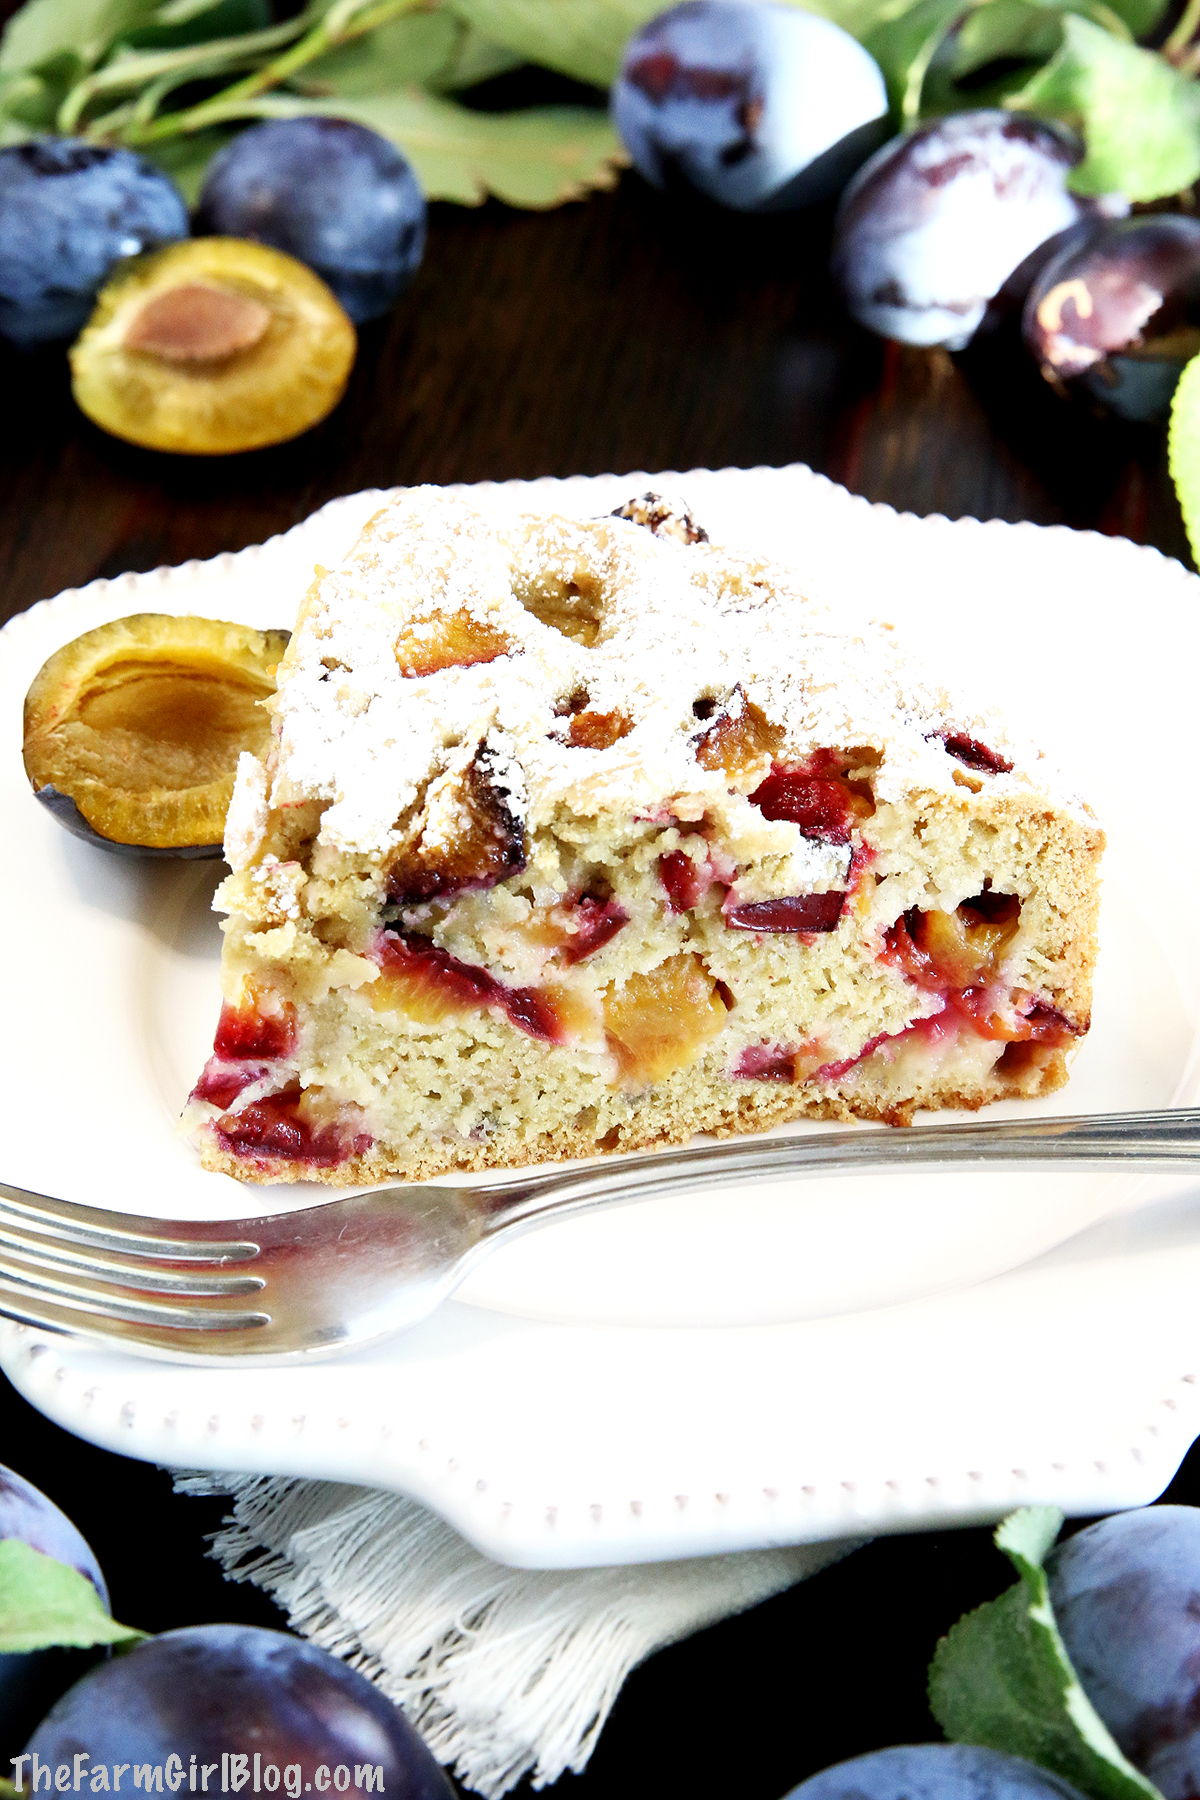  Plums are amazing for baking! They have just the right amount of tartness that balances perfectly with the sweet sponge cake. This Simple Gluten-Free Plum Coffee Cake recipe is moist, fluffy, and loaded with juicy homegrown Damson plums. It is very easy to make but is absolutely delicious. 